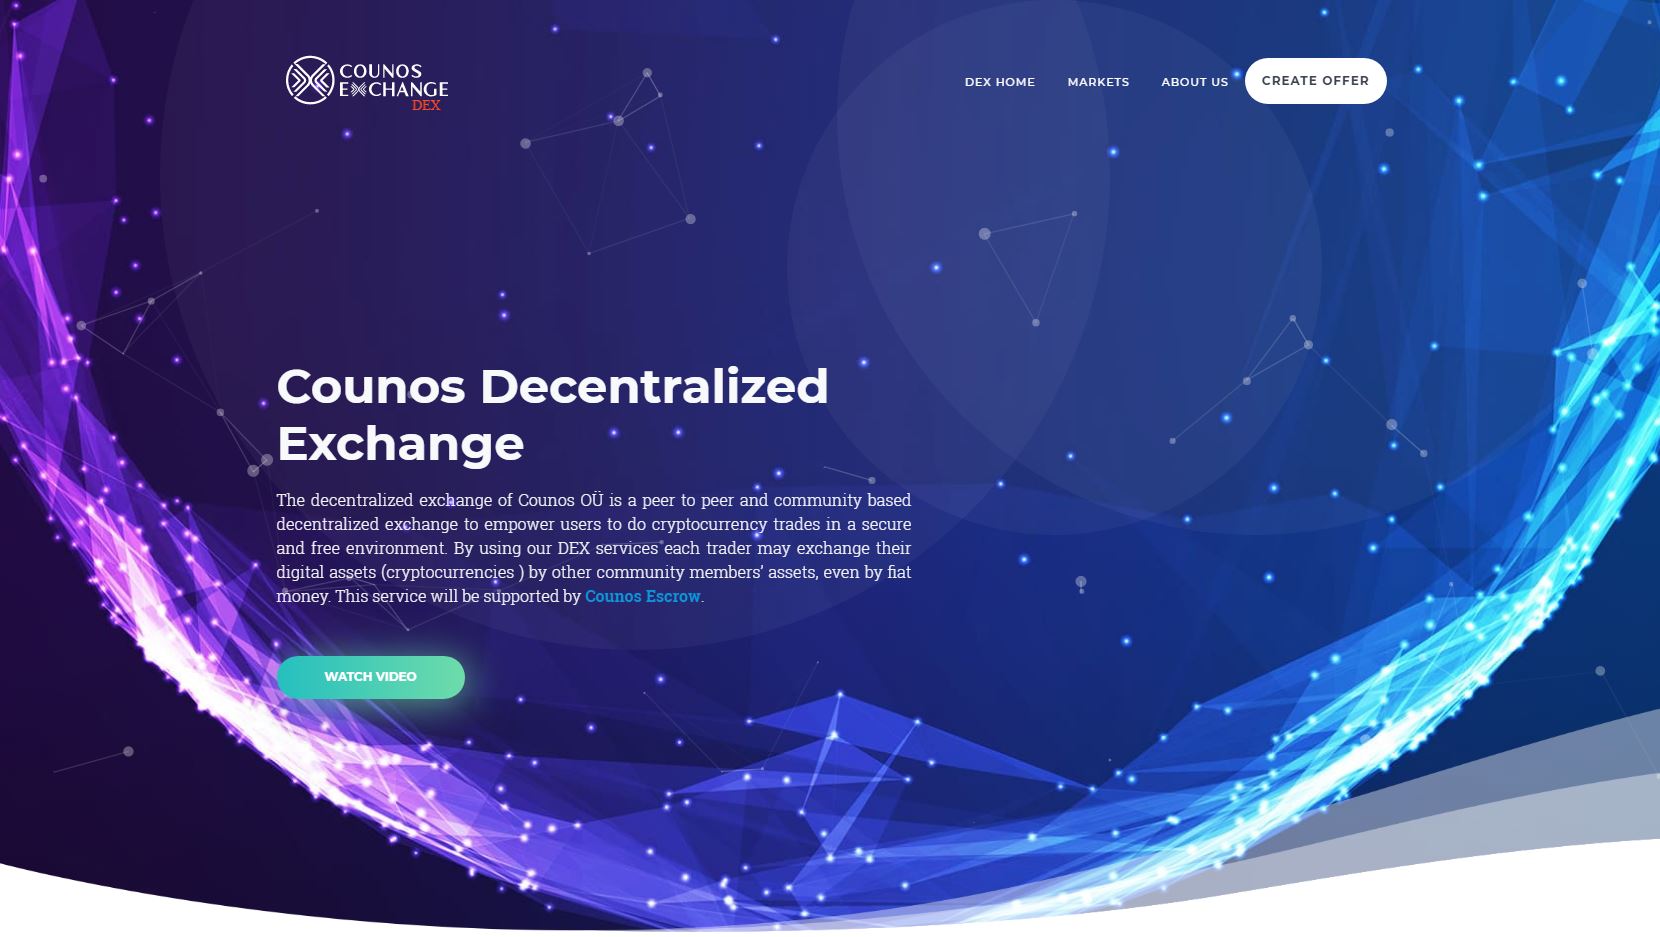 Counos Decentralized Exchange 